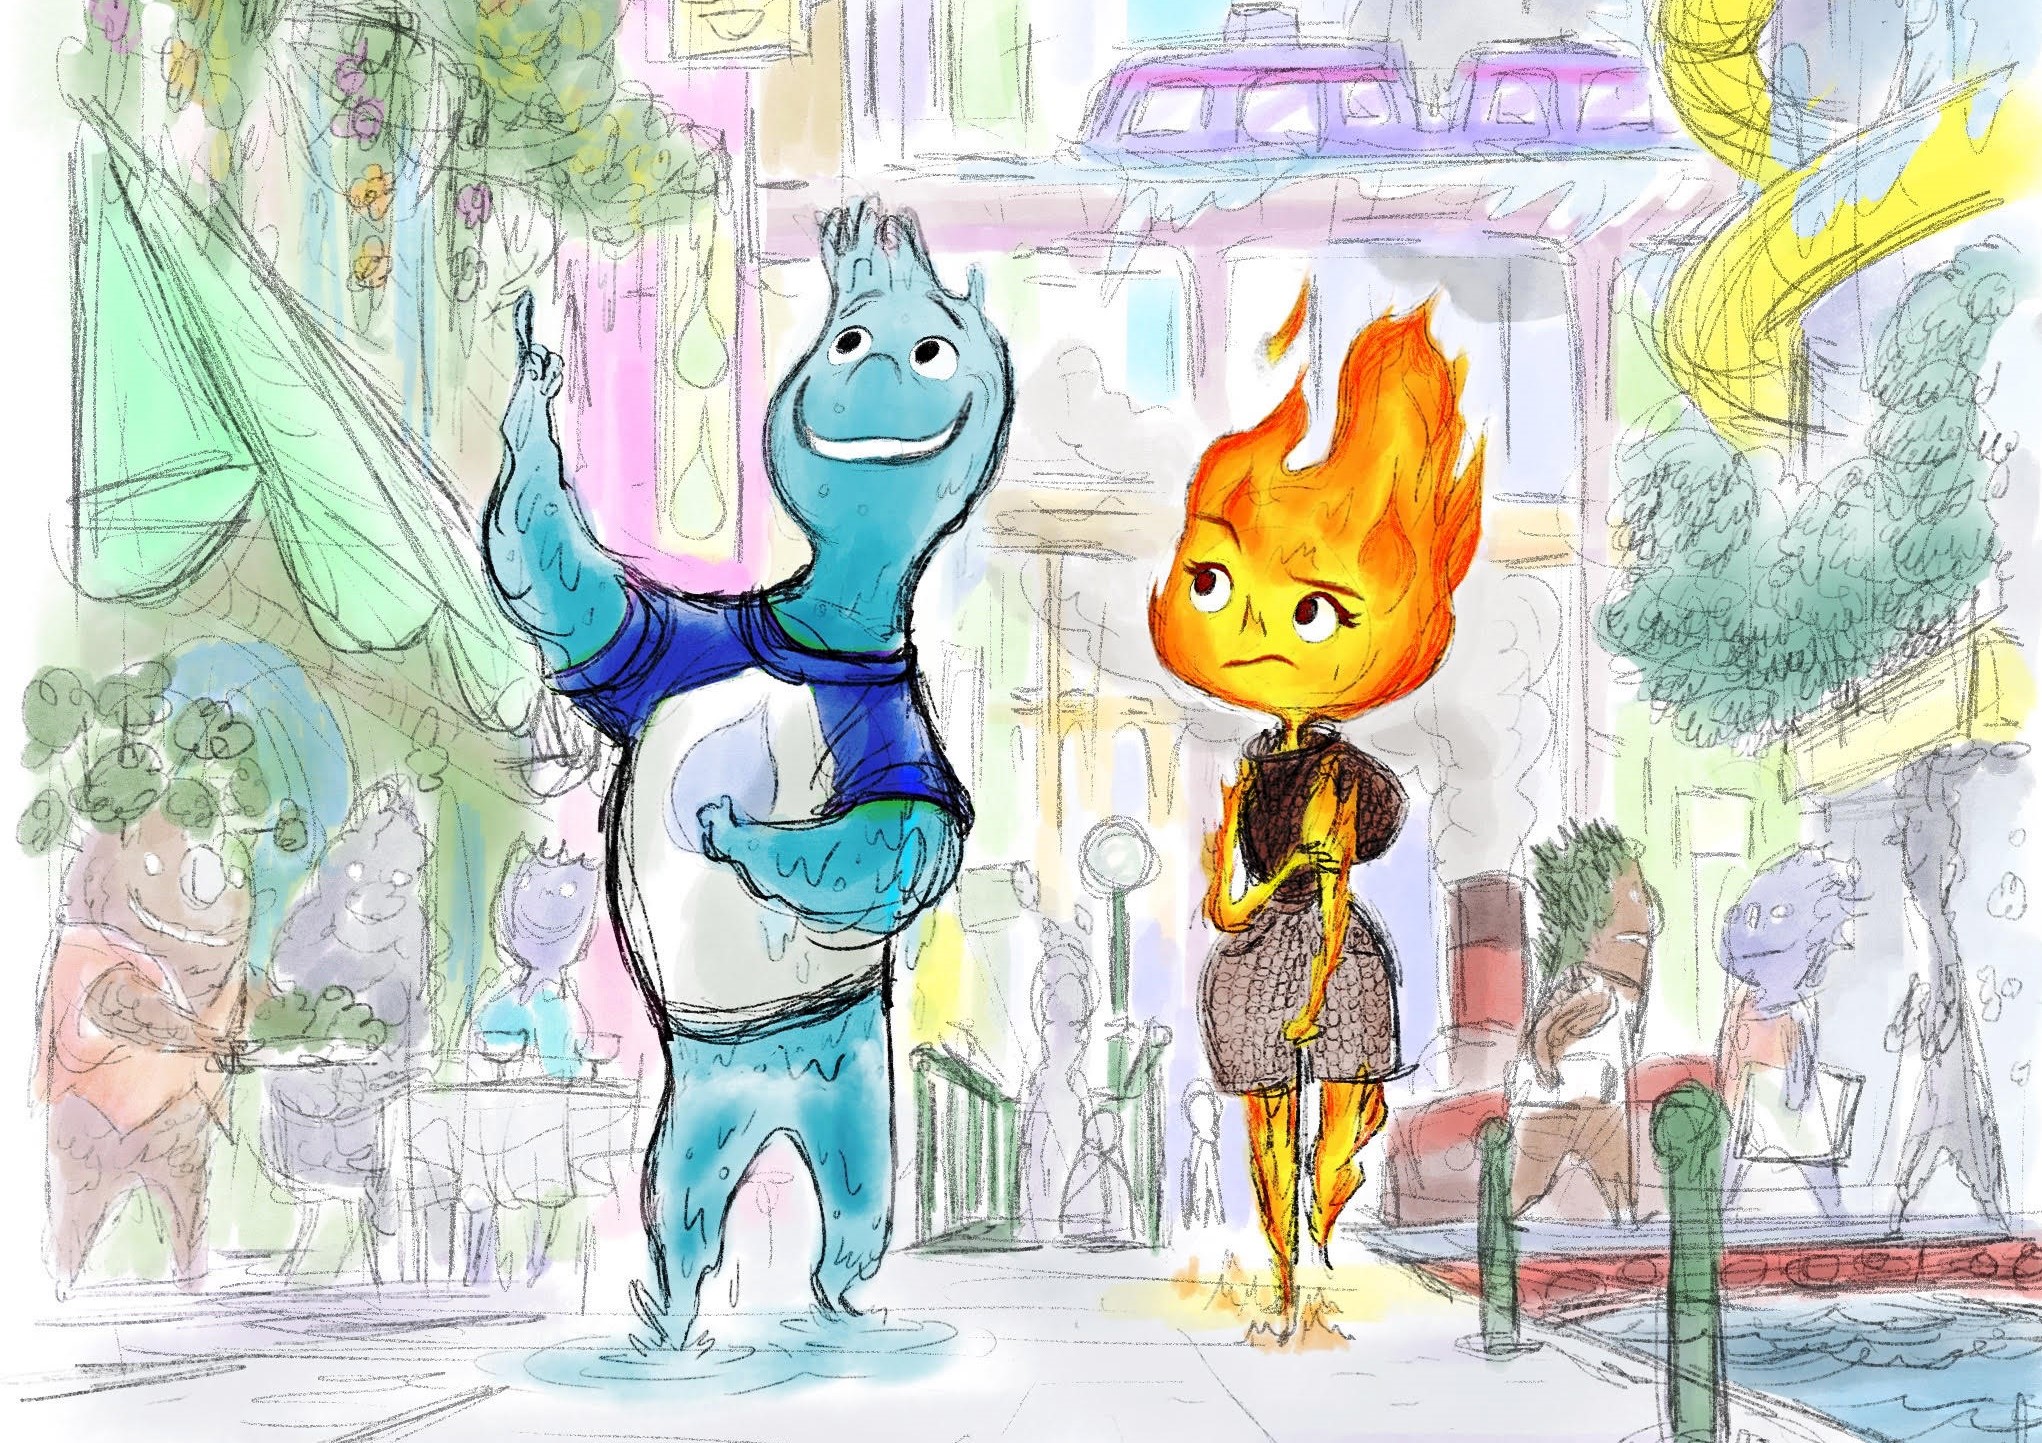 Pixar reveals concept art and release date for ‘Elemental’